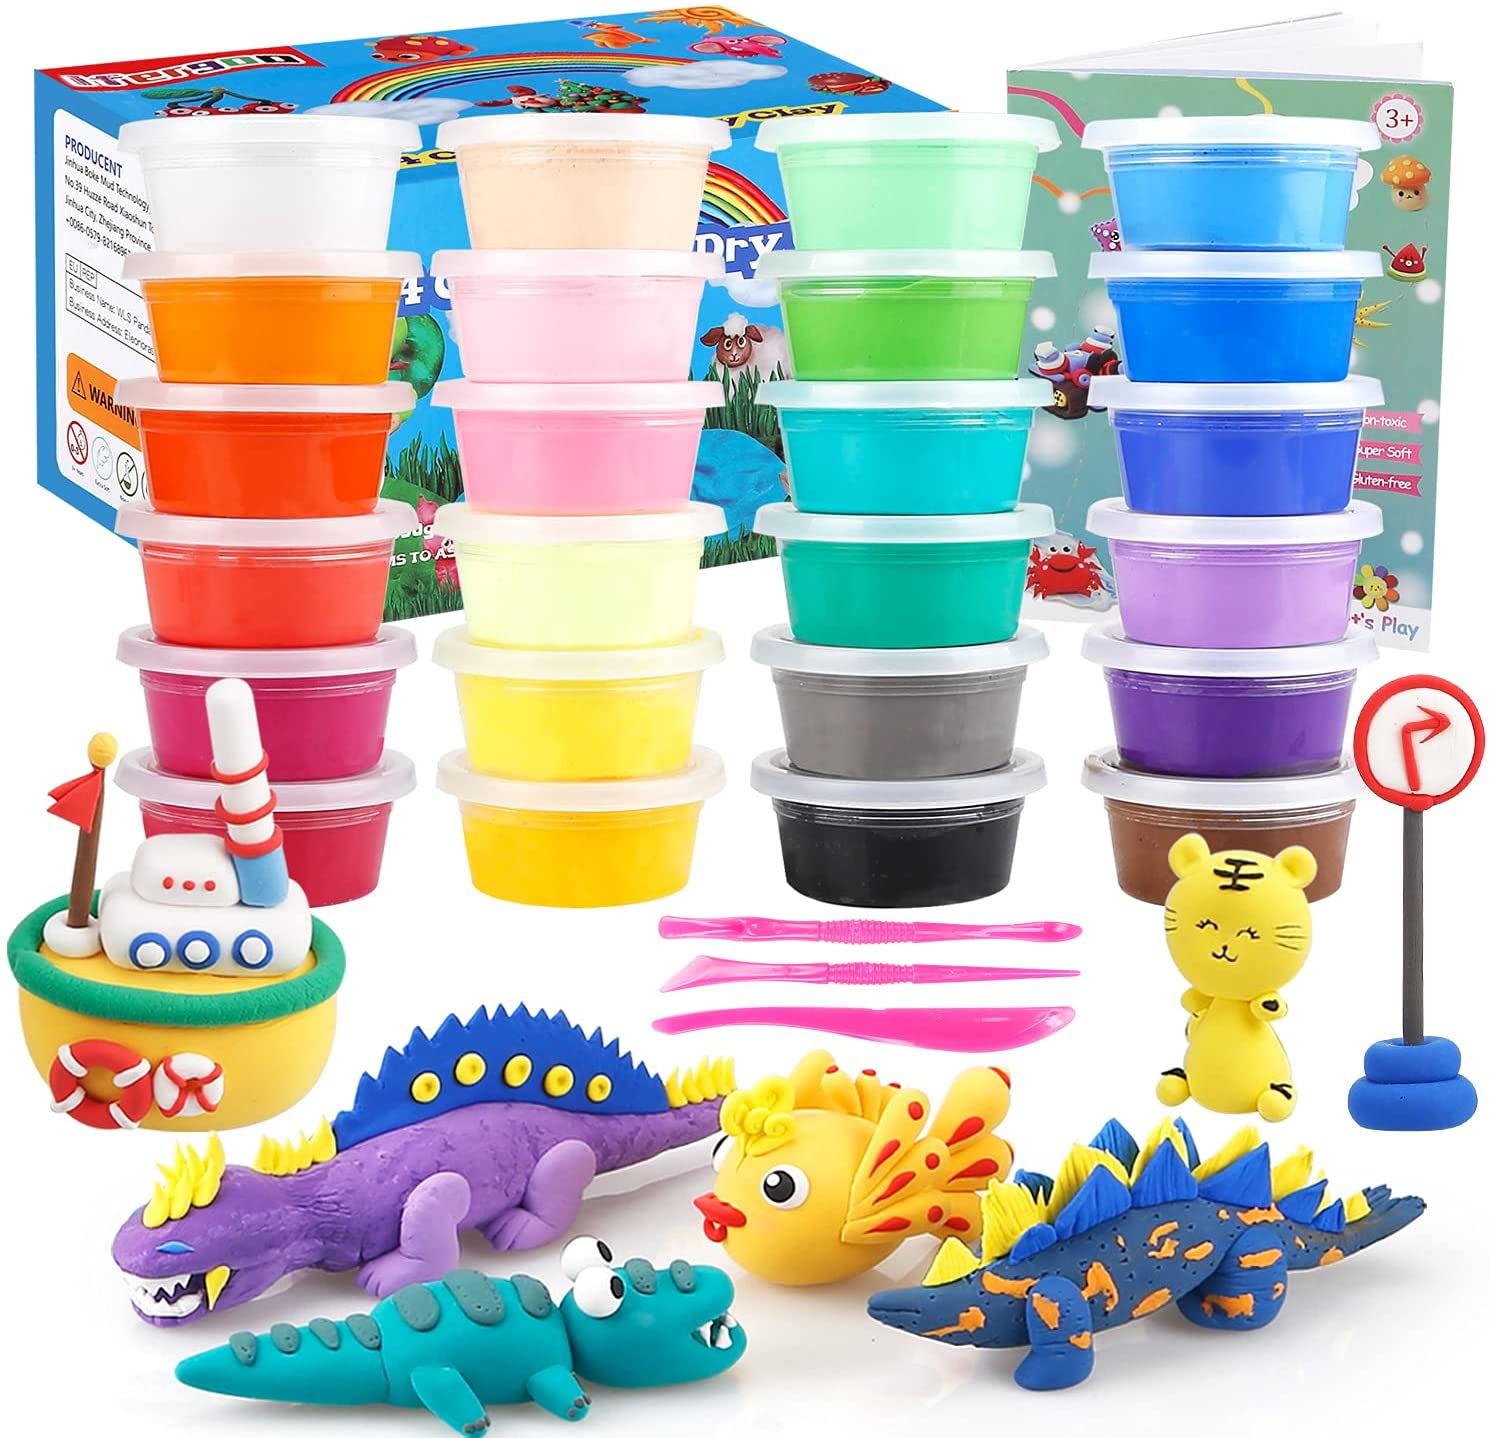 ifergoo Modeling Clay-24 Colors Air Dry Clay, DIY Magic Clay Kids Toy Set